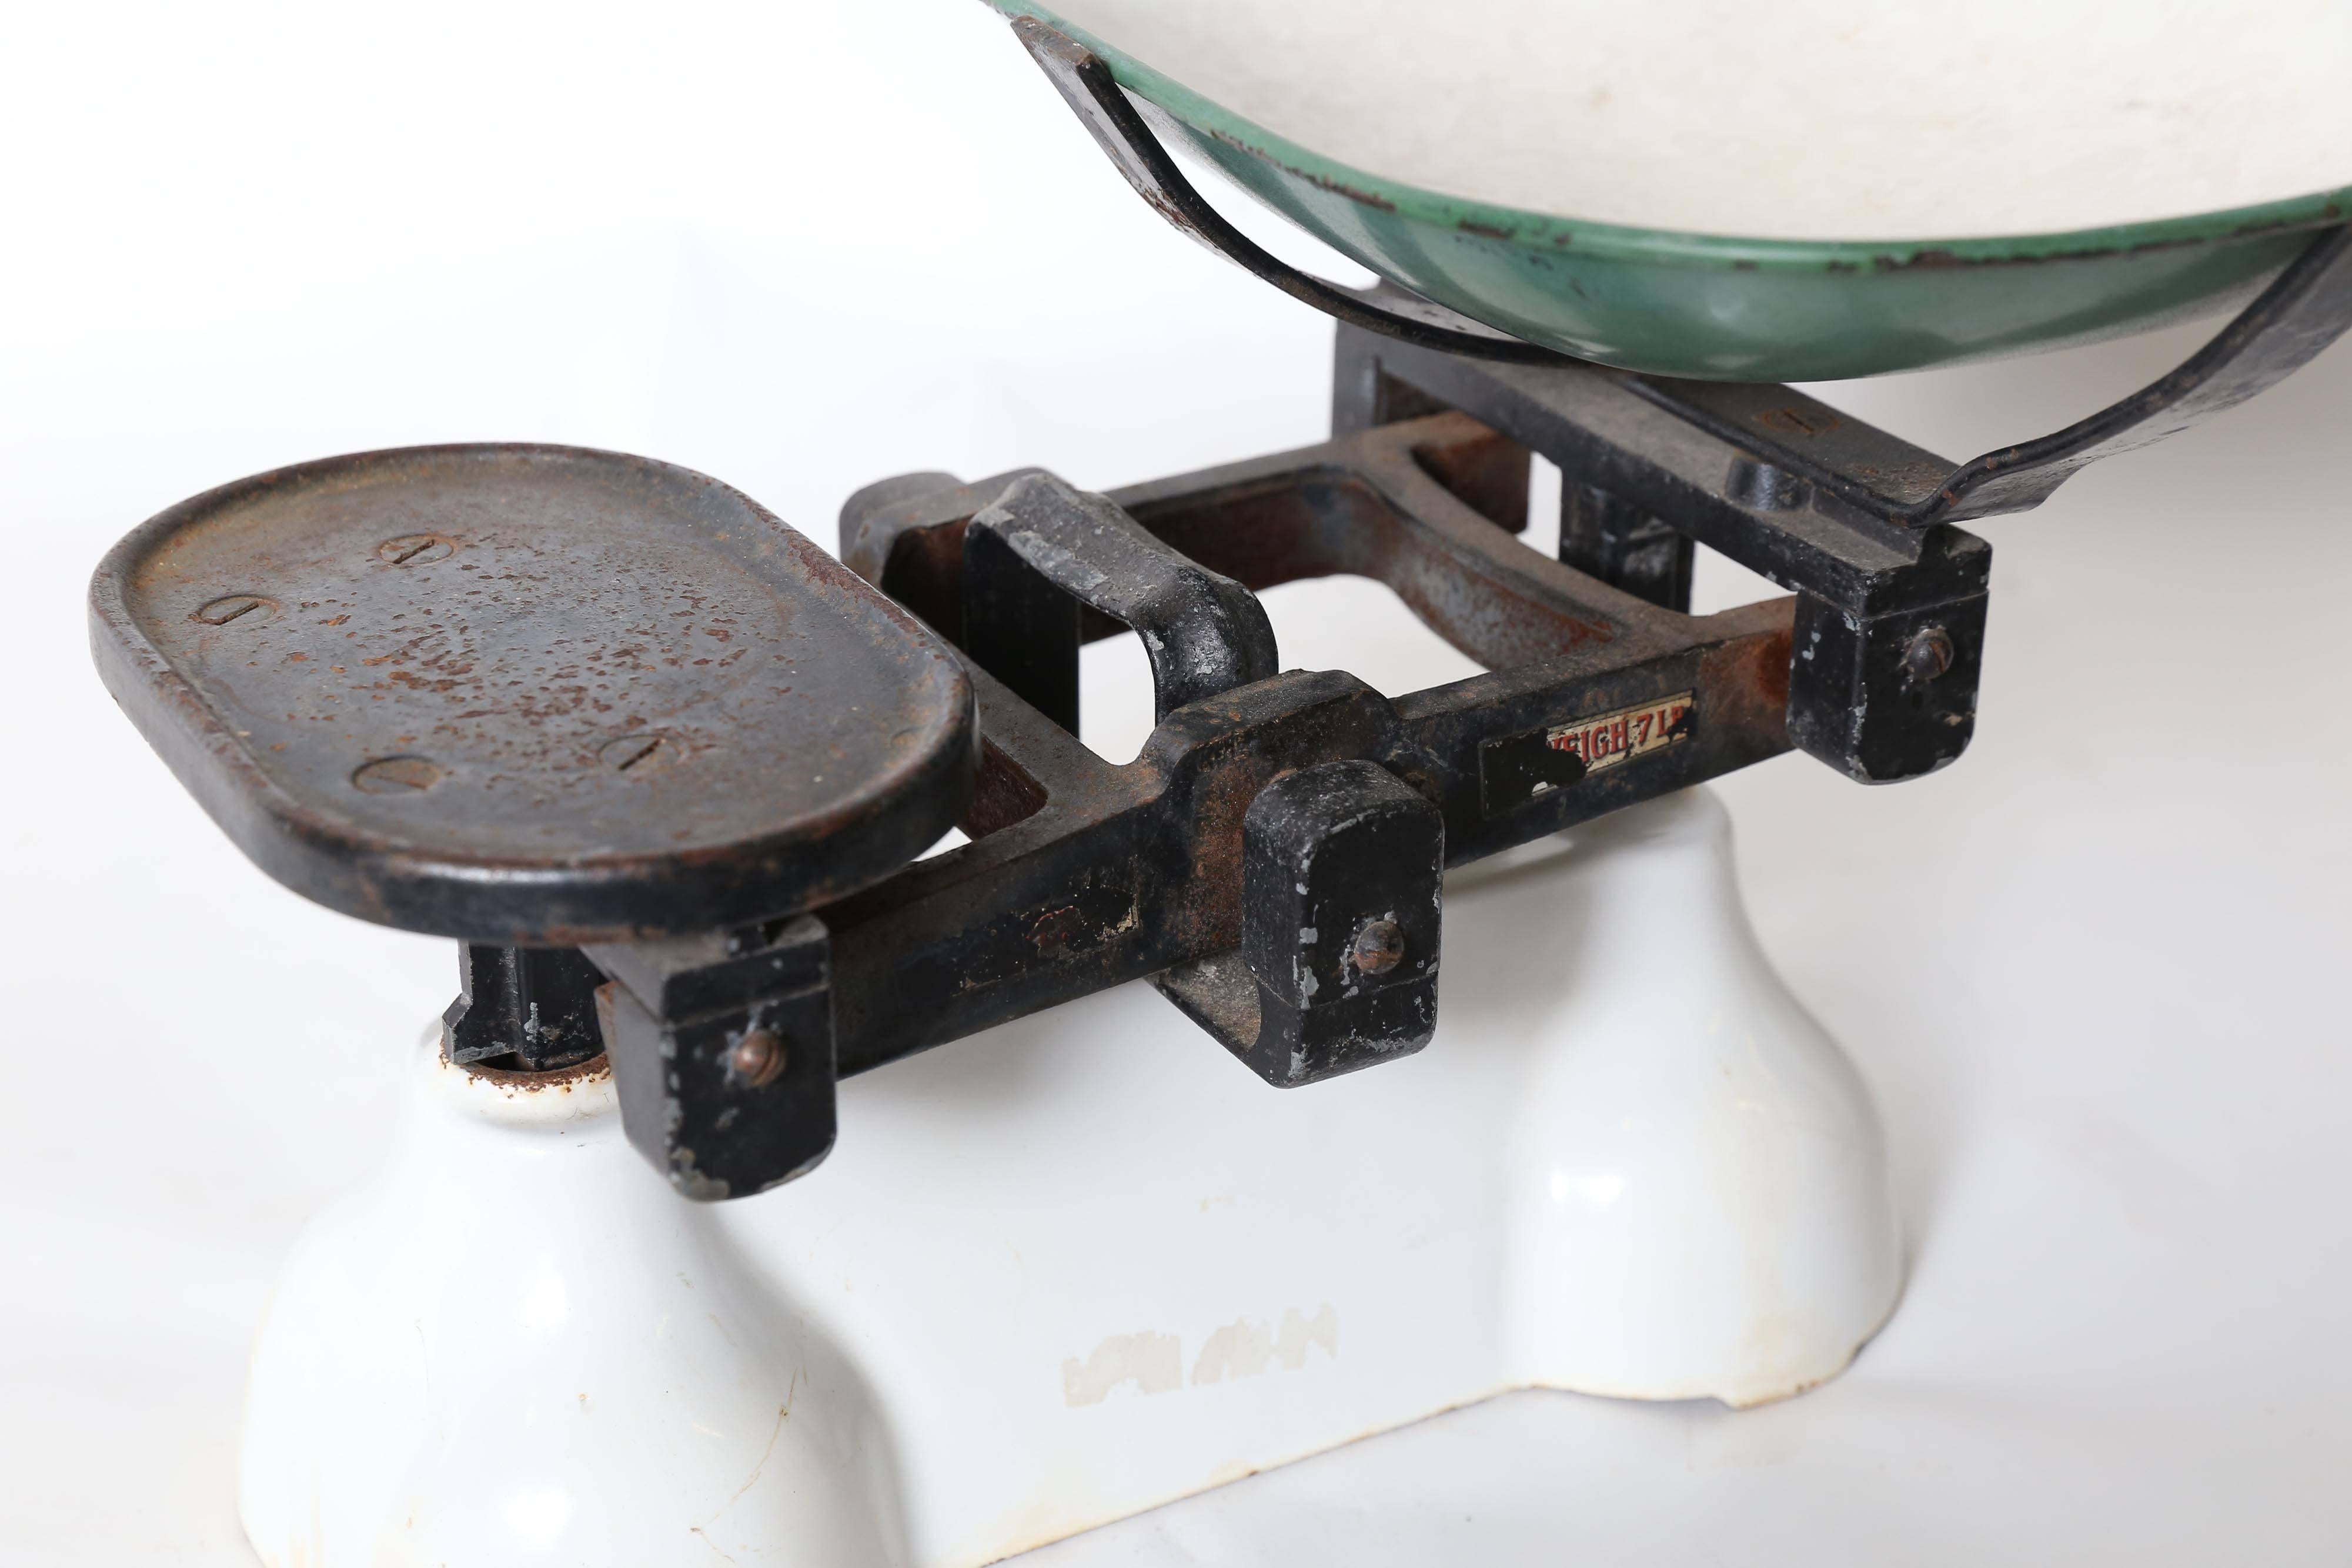 A small 7 lb. Roberval balance scale found in France. A white enameled metal base of considerable weight supports the plate and pan mechanism. The pan measures 9.5 inches x 13.25 inches x 2.5 inches with a white enameled interior and green enameled